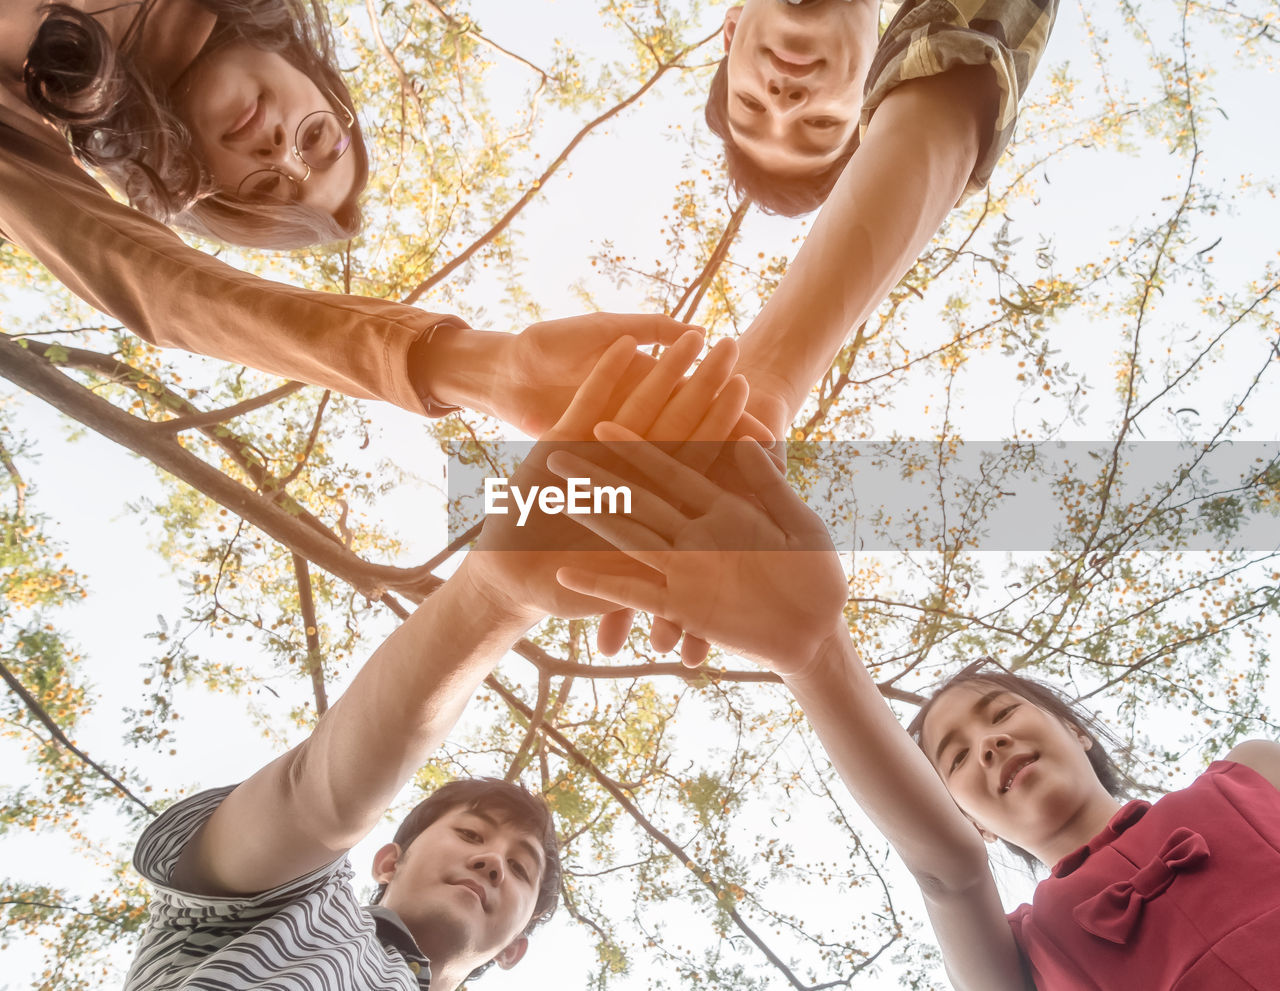 Low angle view of friends stacking hands against trees